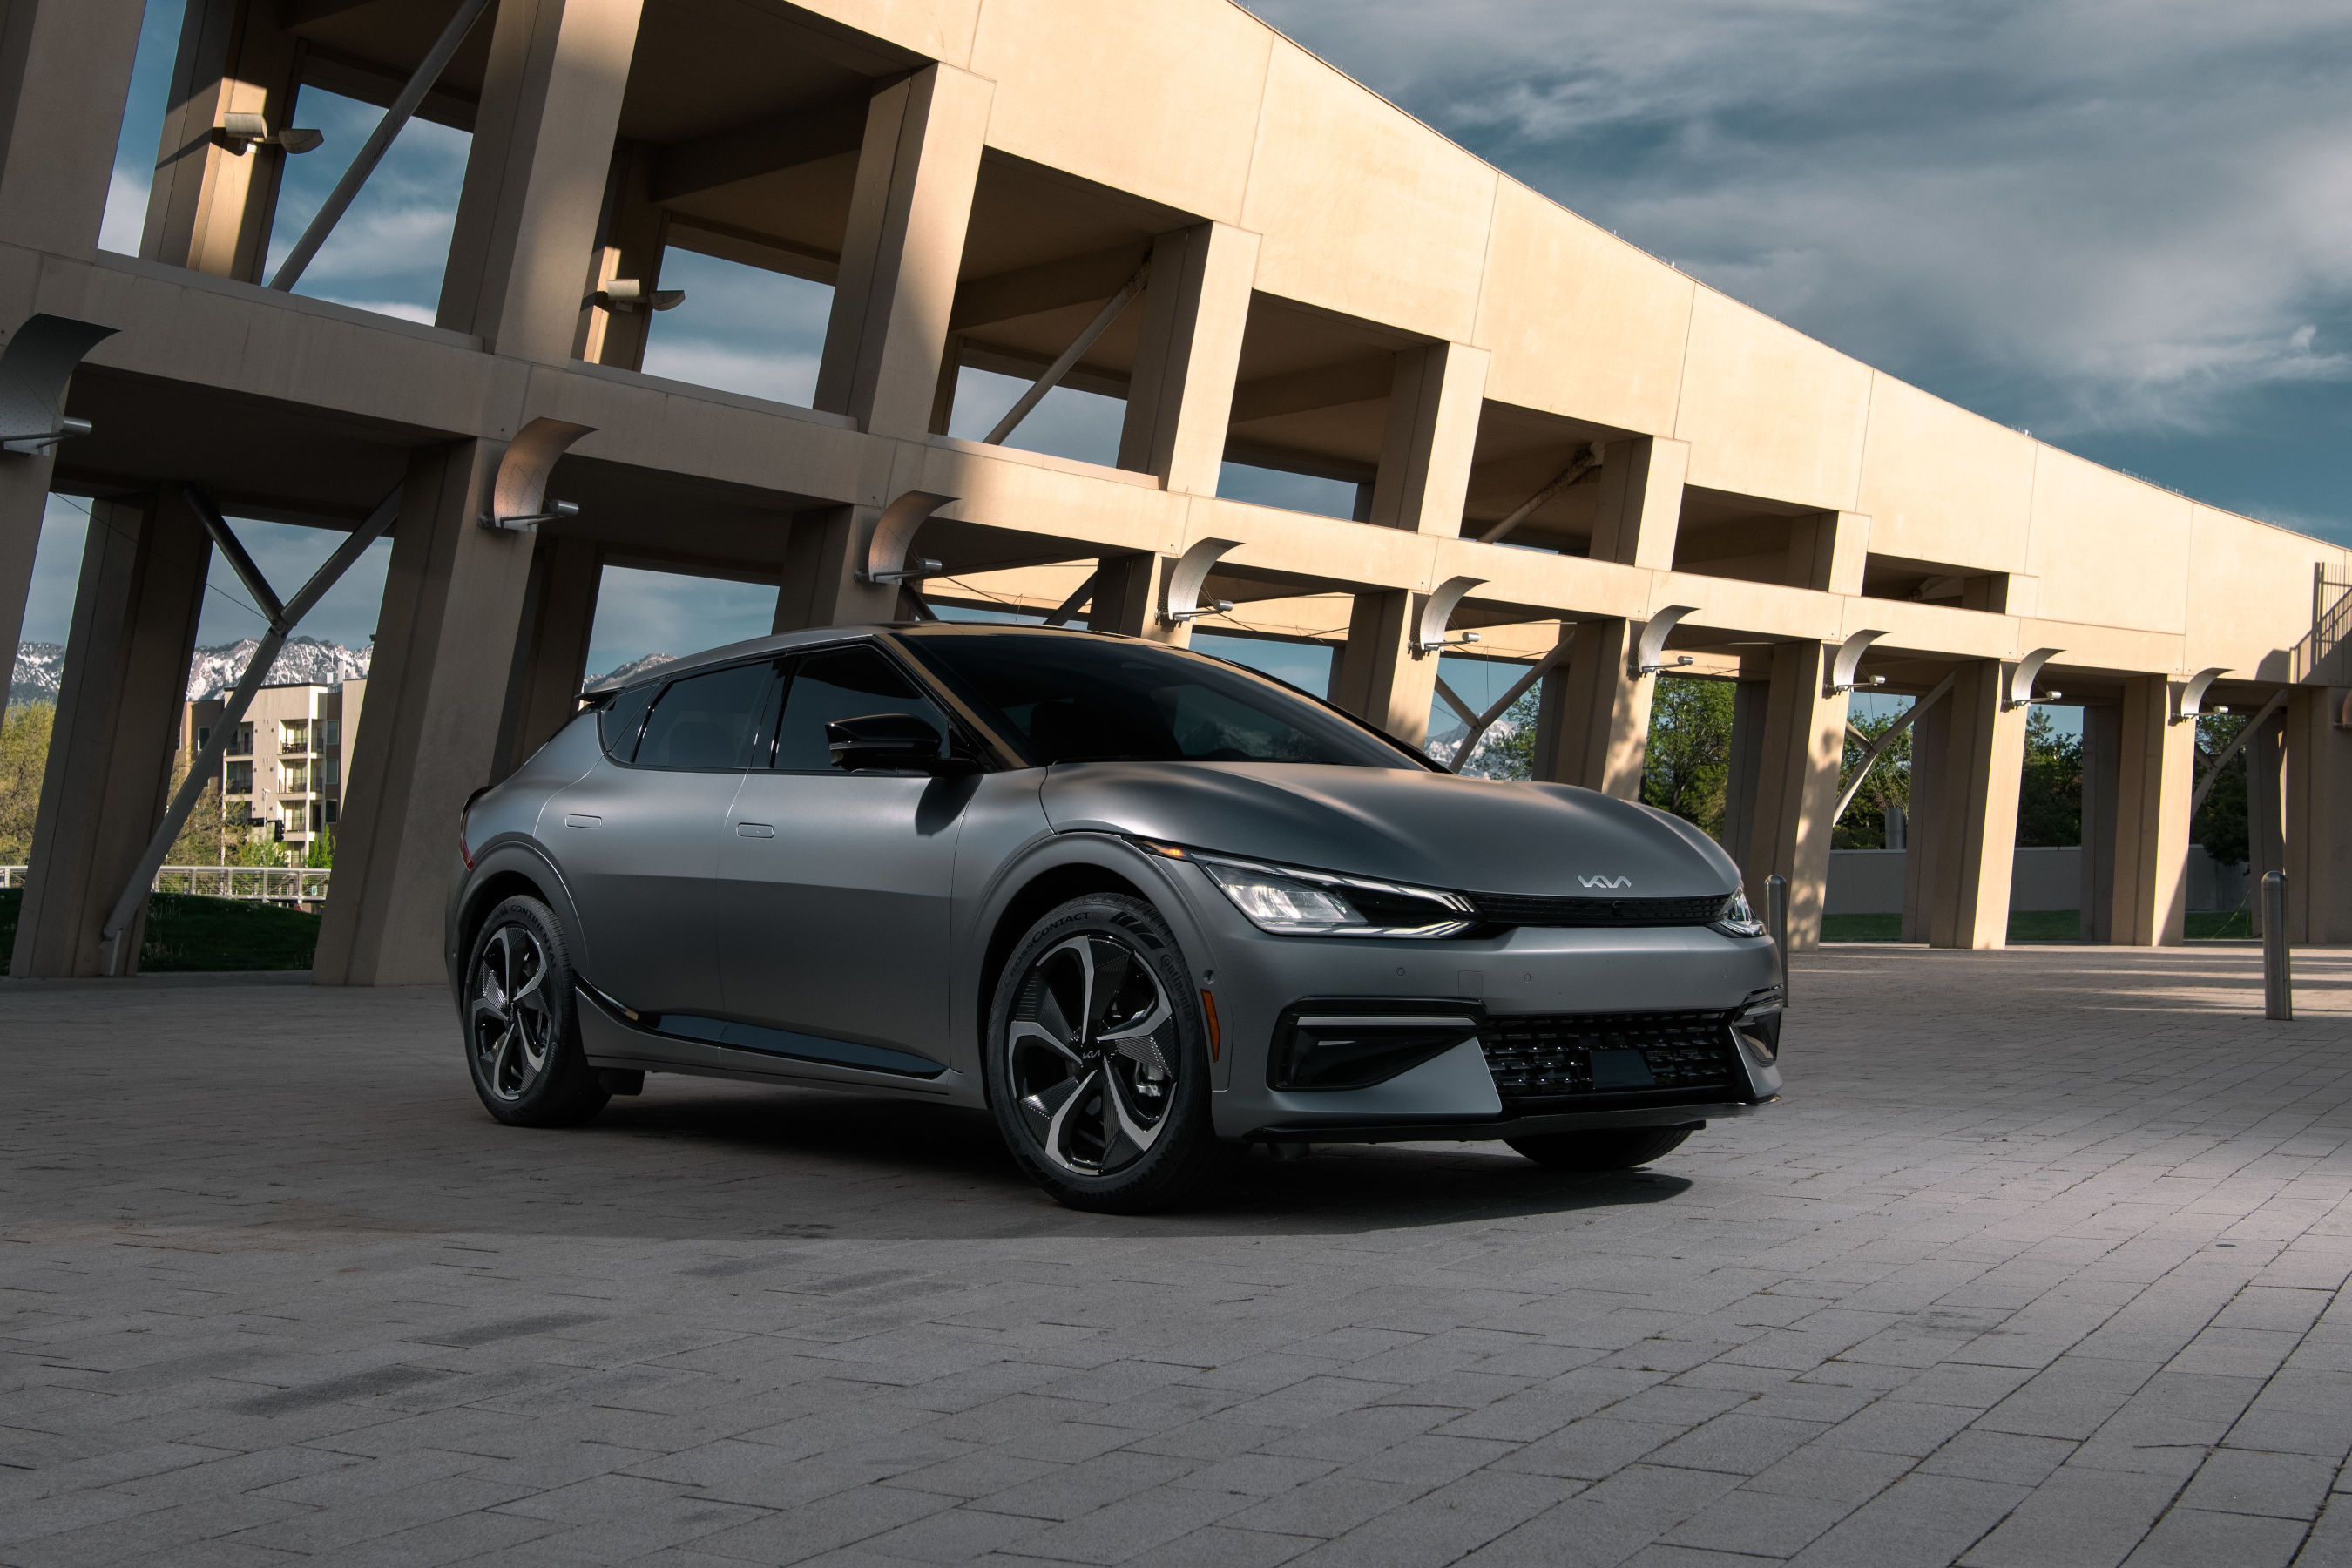 All-new EV6 is Kia's first dedicated EV and signals the beginning of the brand's transformative 'Plan S' electrification strategy.